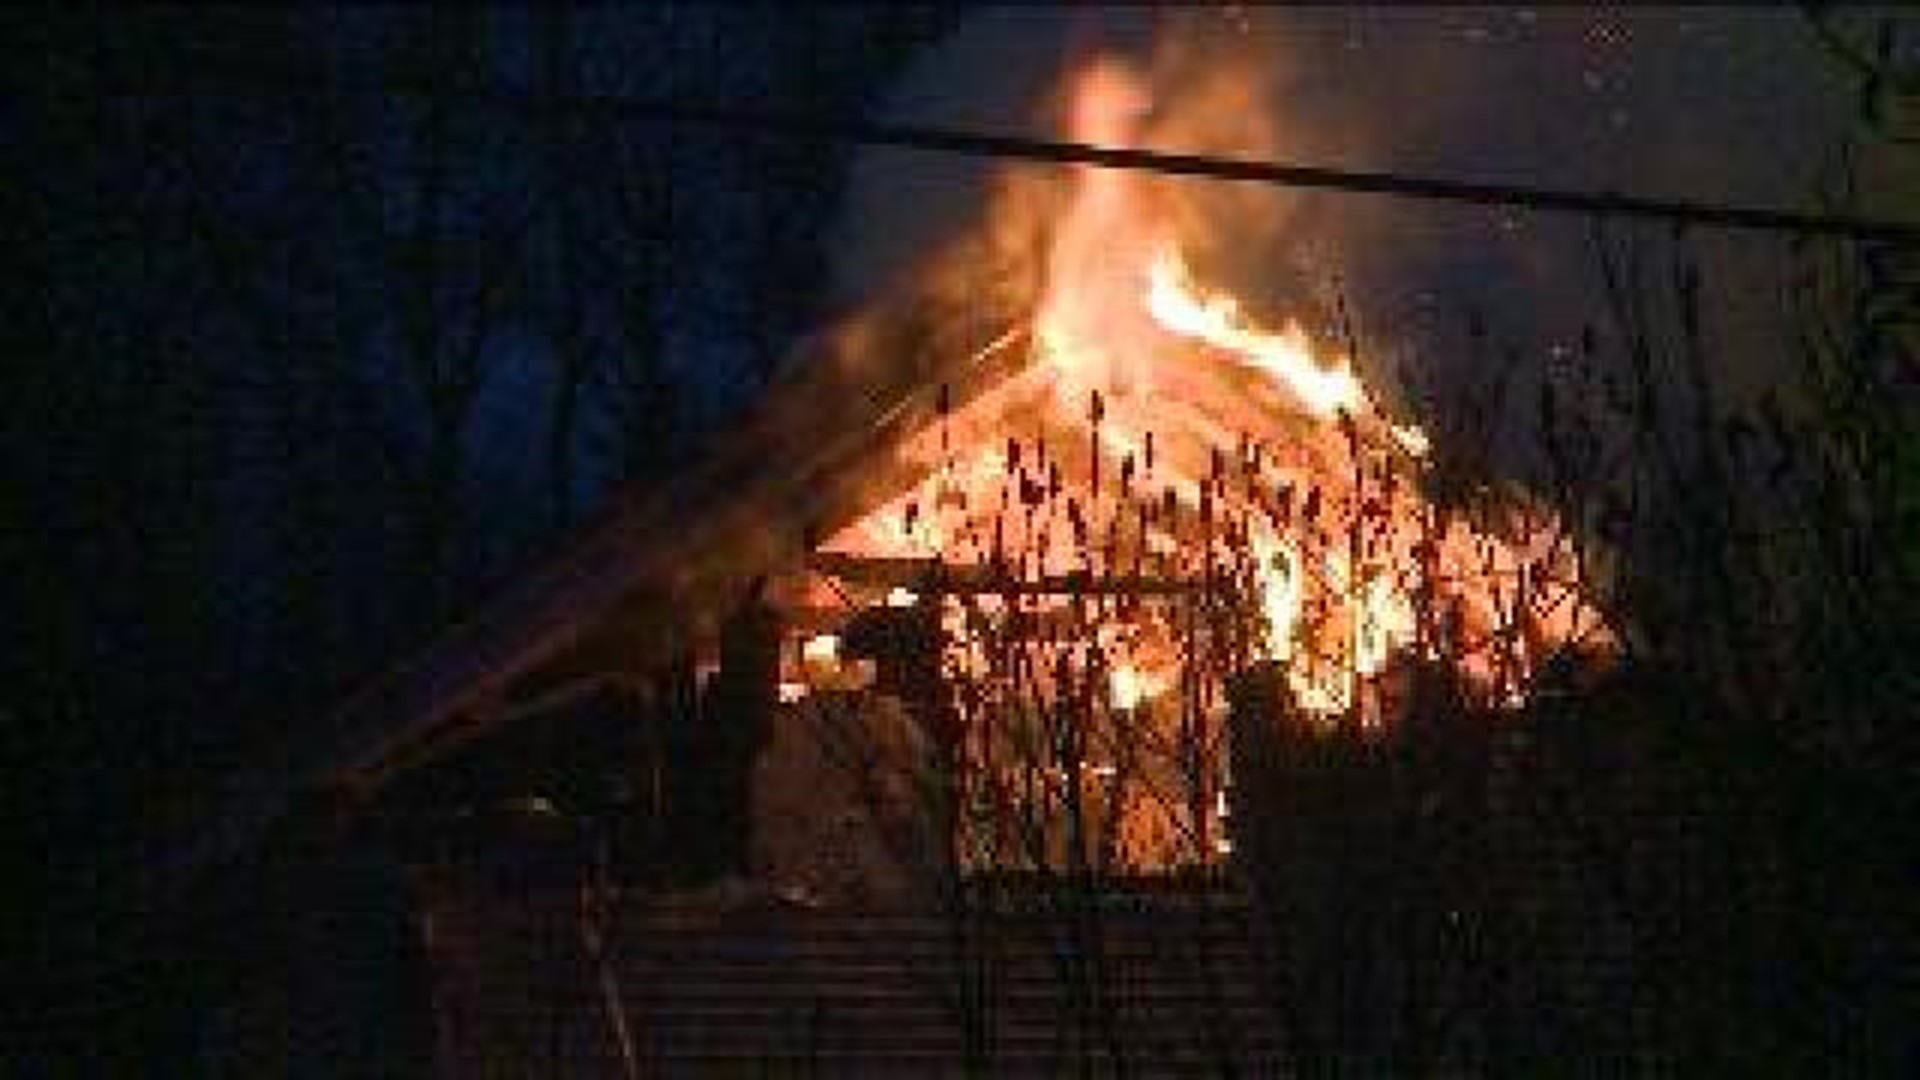 Fire Causes Heavy Damage to Home in Carbon County